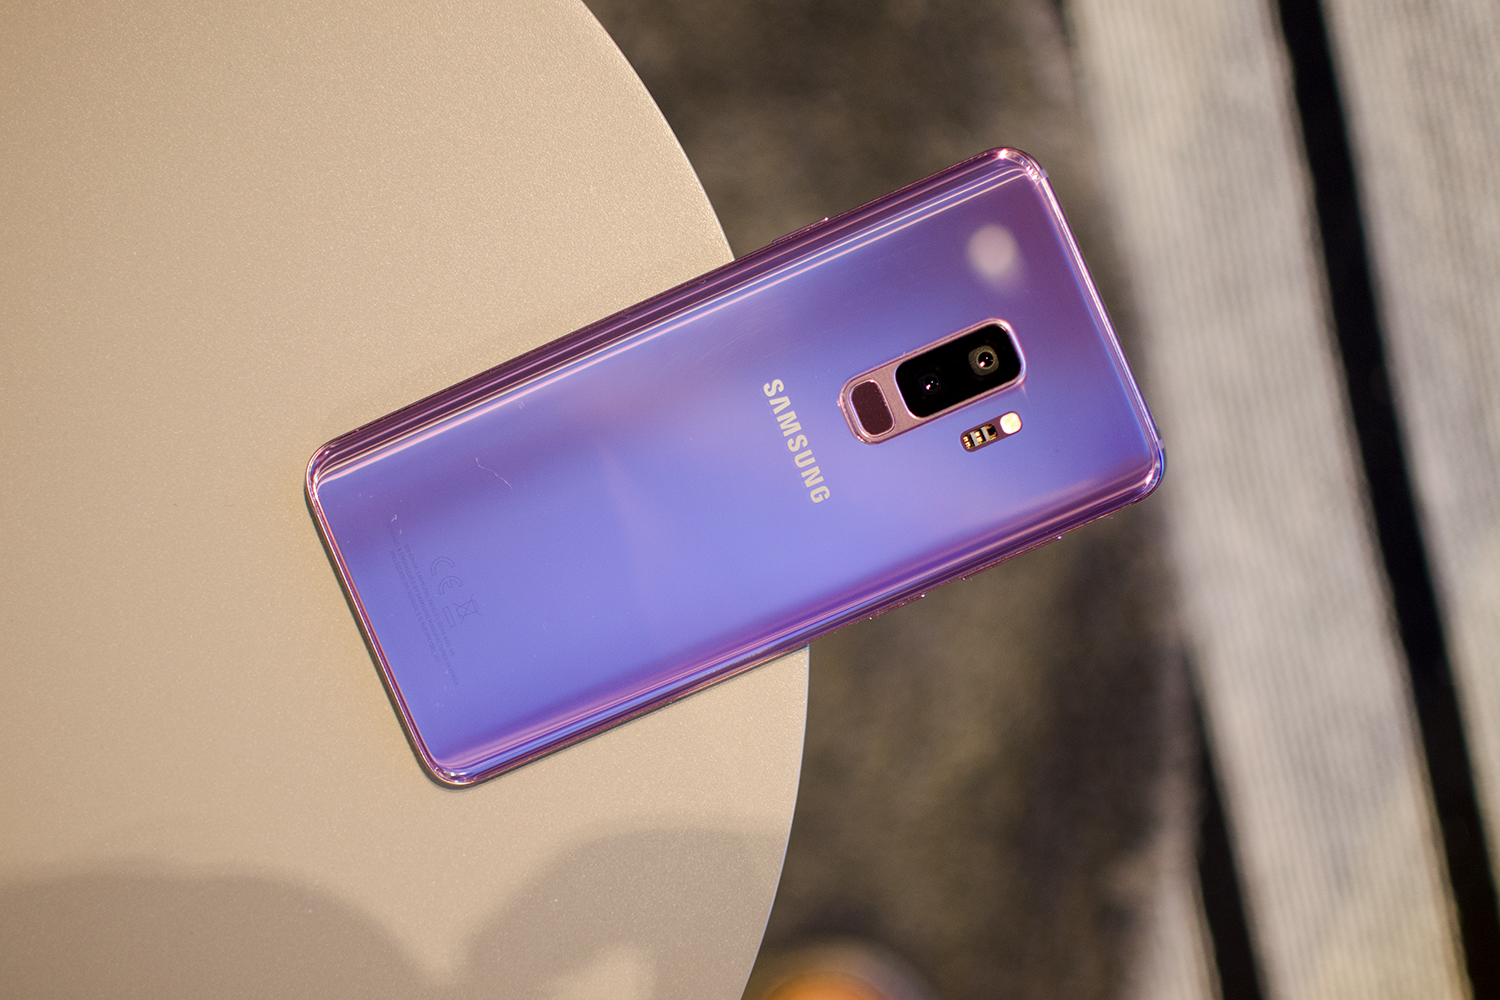 Samsung Galaxy S9 Plus first impressions: Improving upon the S8